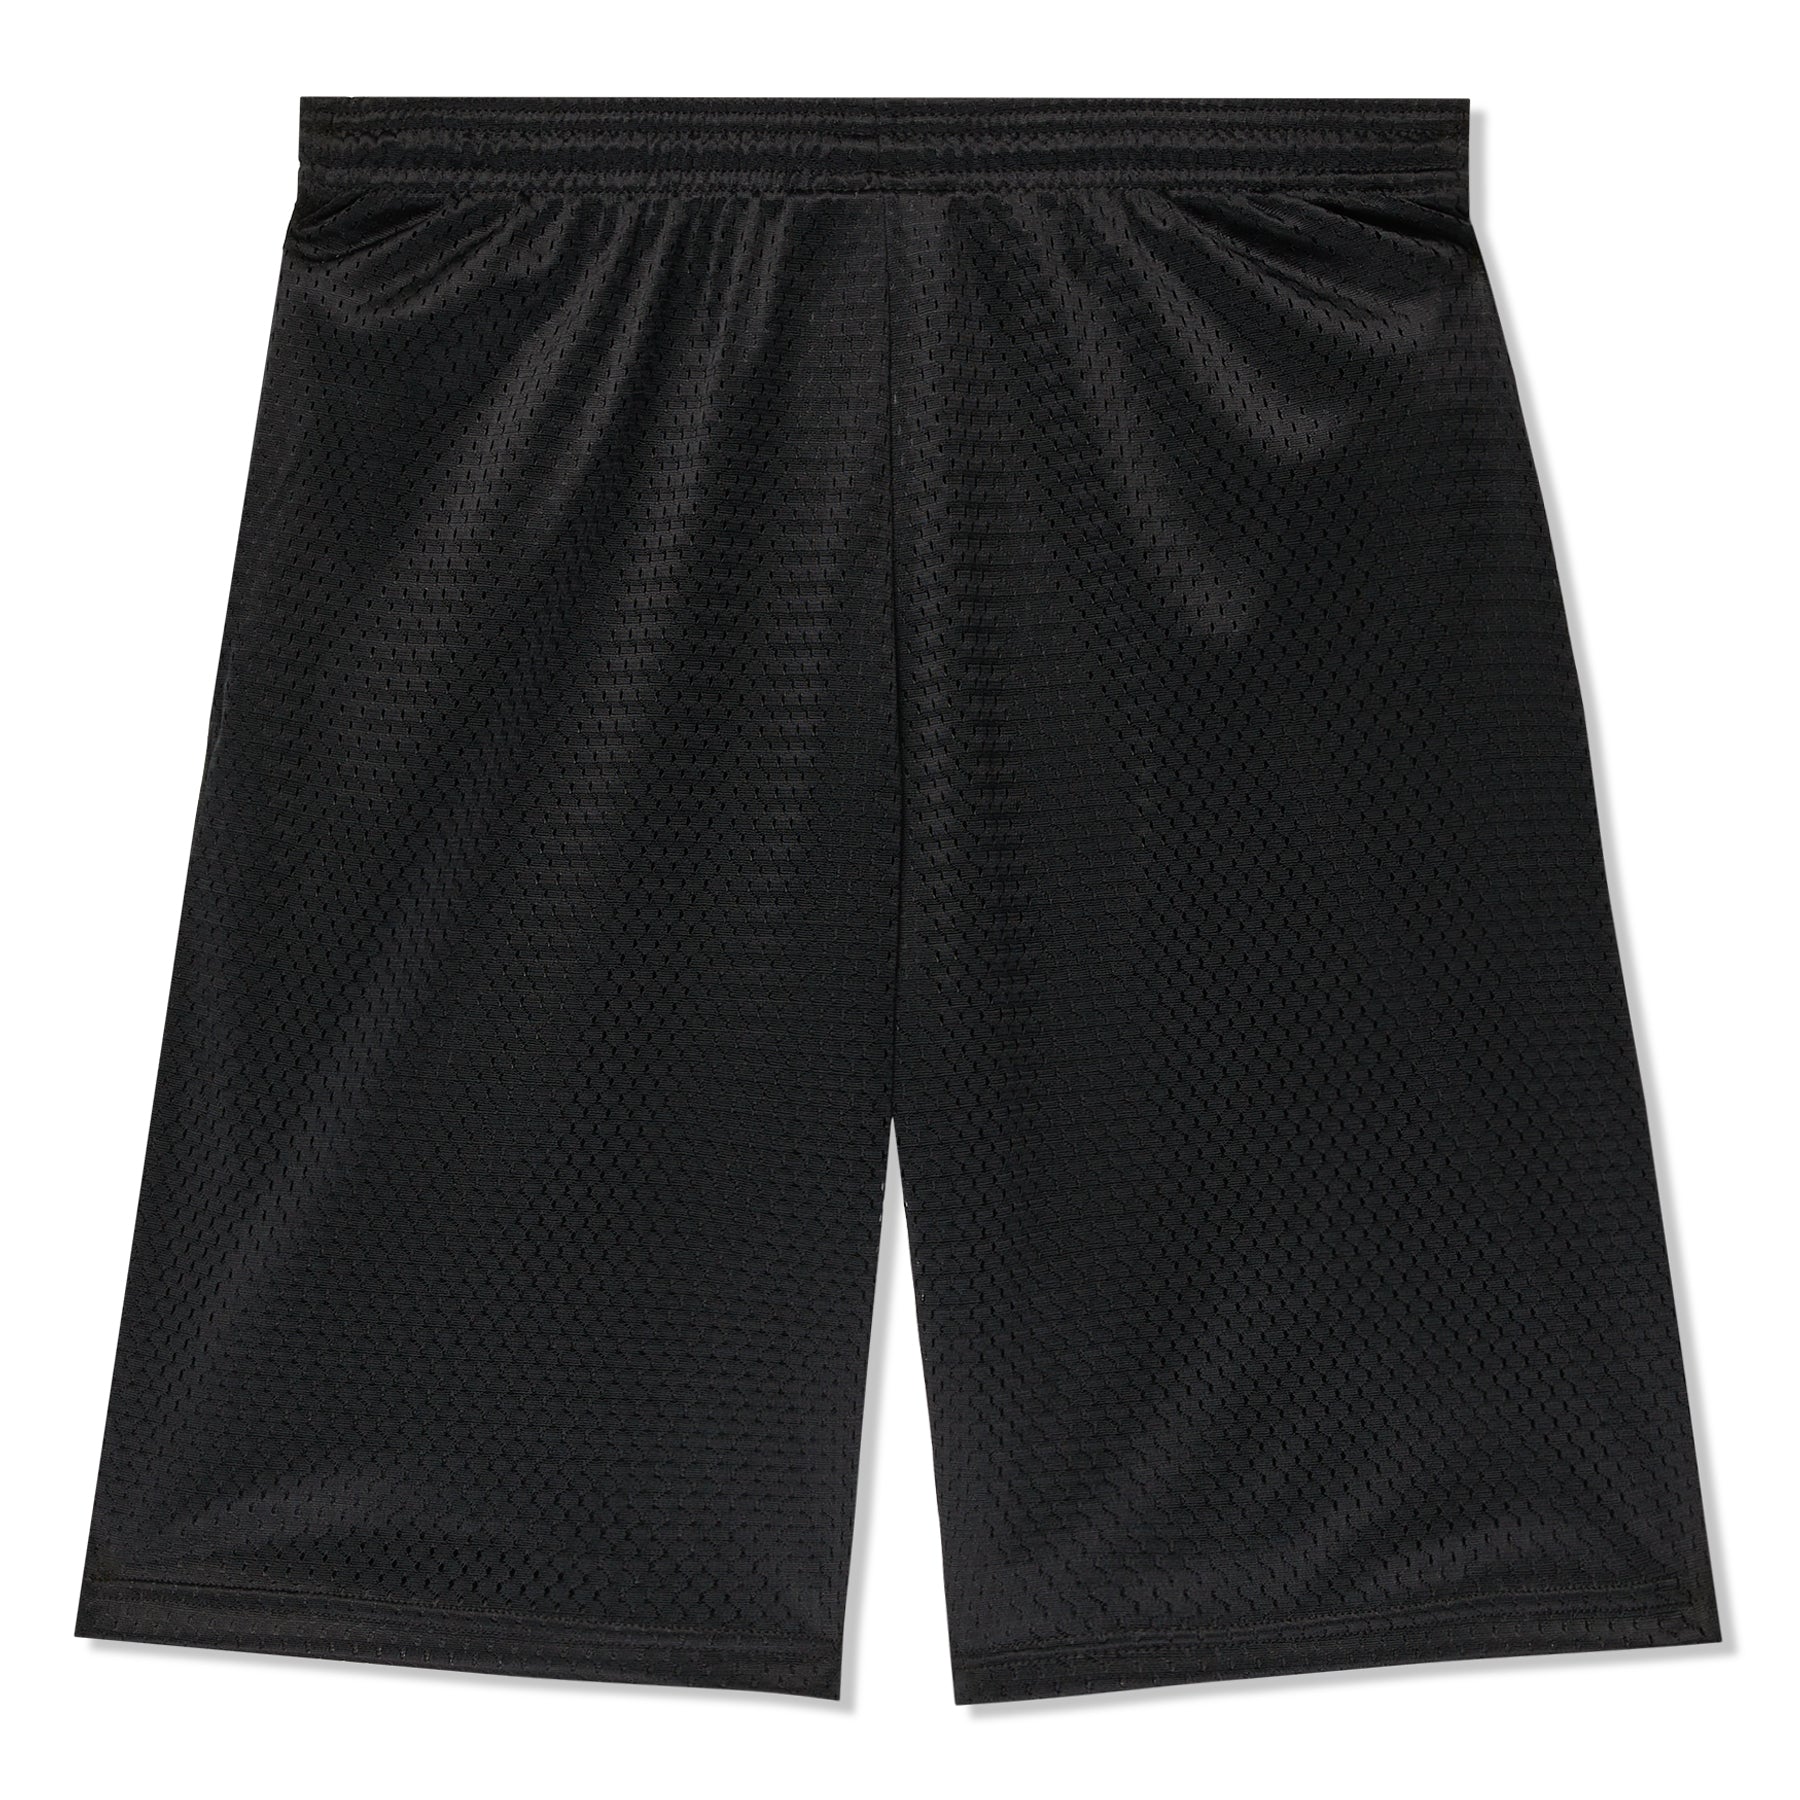 Snack Skateboards Seein the Sights Chicago Shorts (Black) – CNCPTS